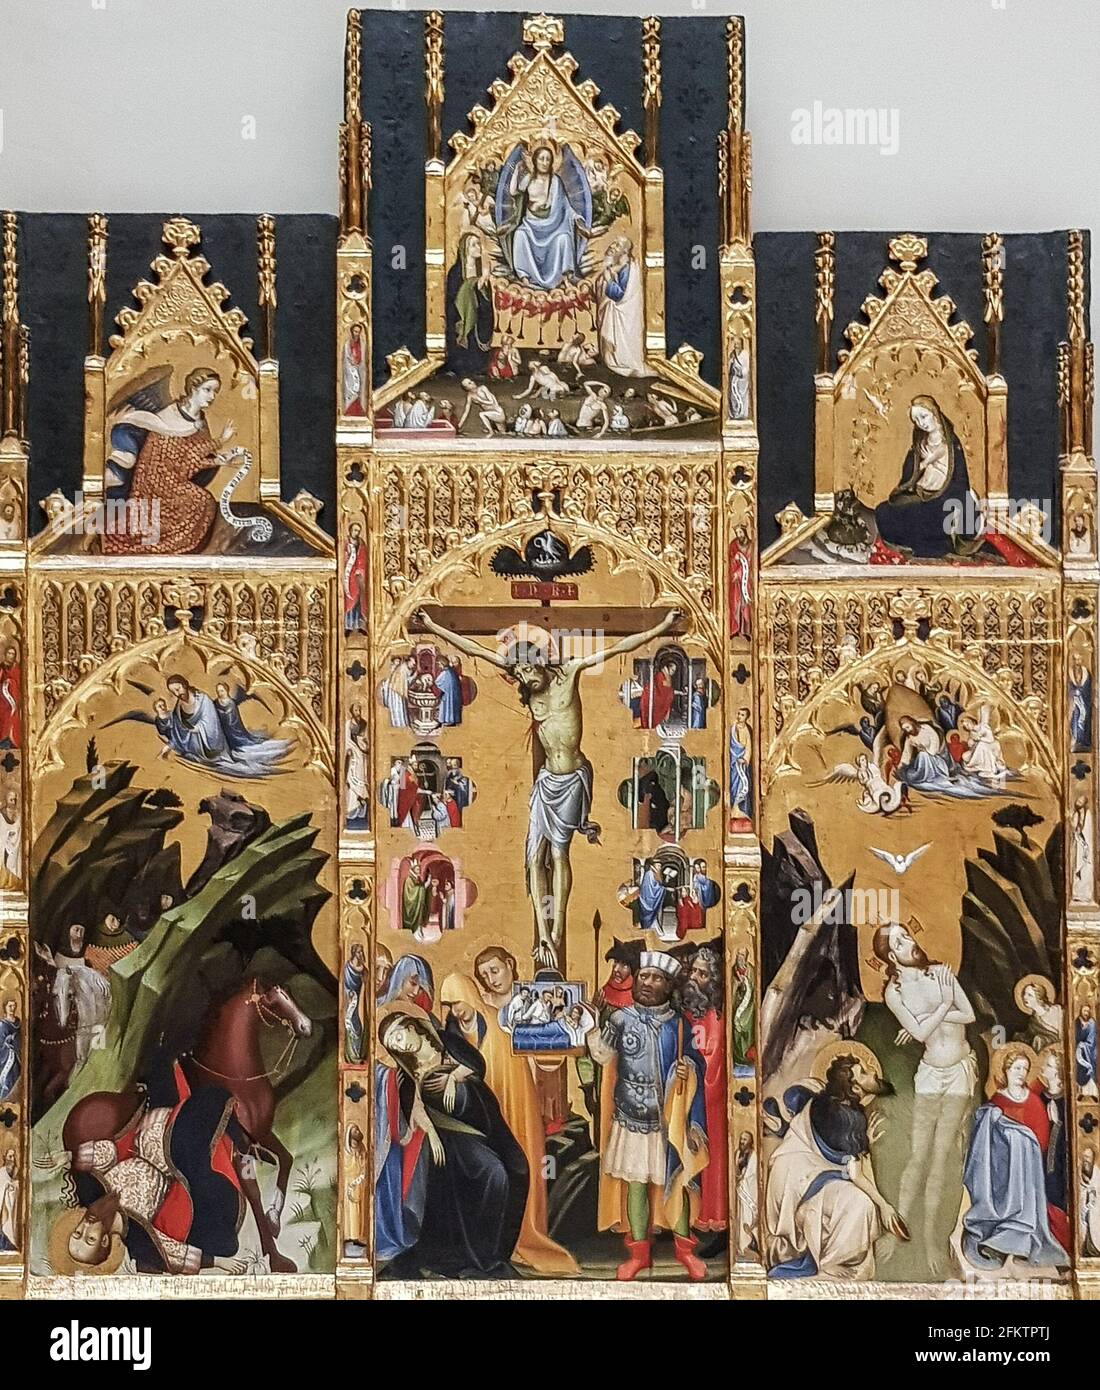 Gherardo Starnina. Documented since 1387 in Florence and died before 1413. Altarpiece of the sacraments, altarpiece by Fray Bonifacio Ferrer. Temper Stock Photo